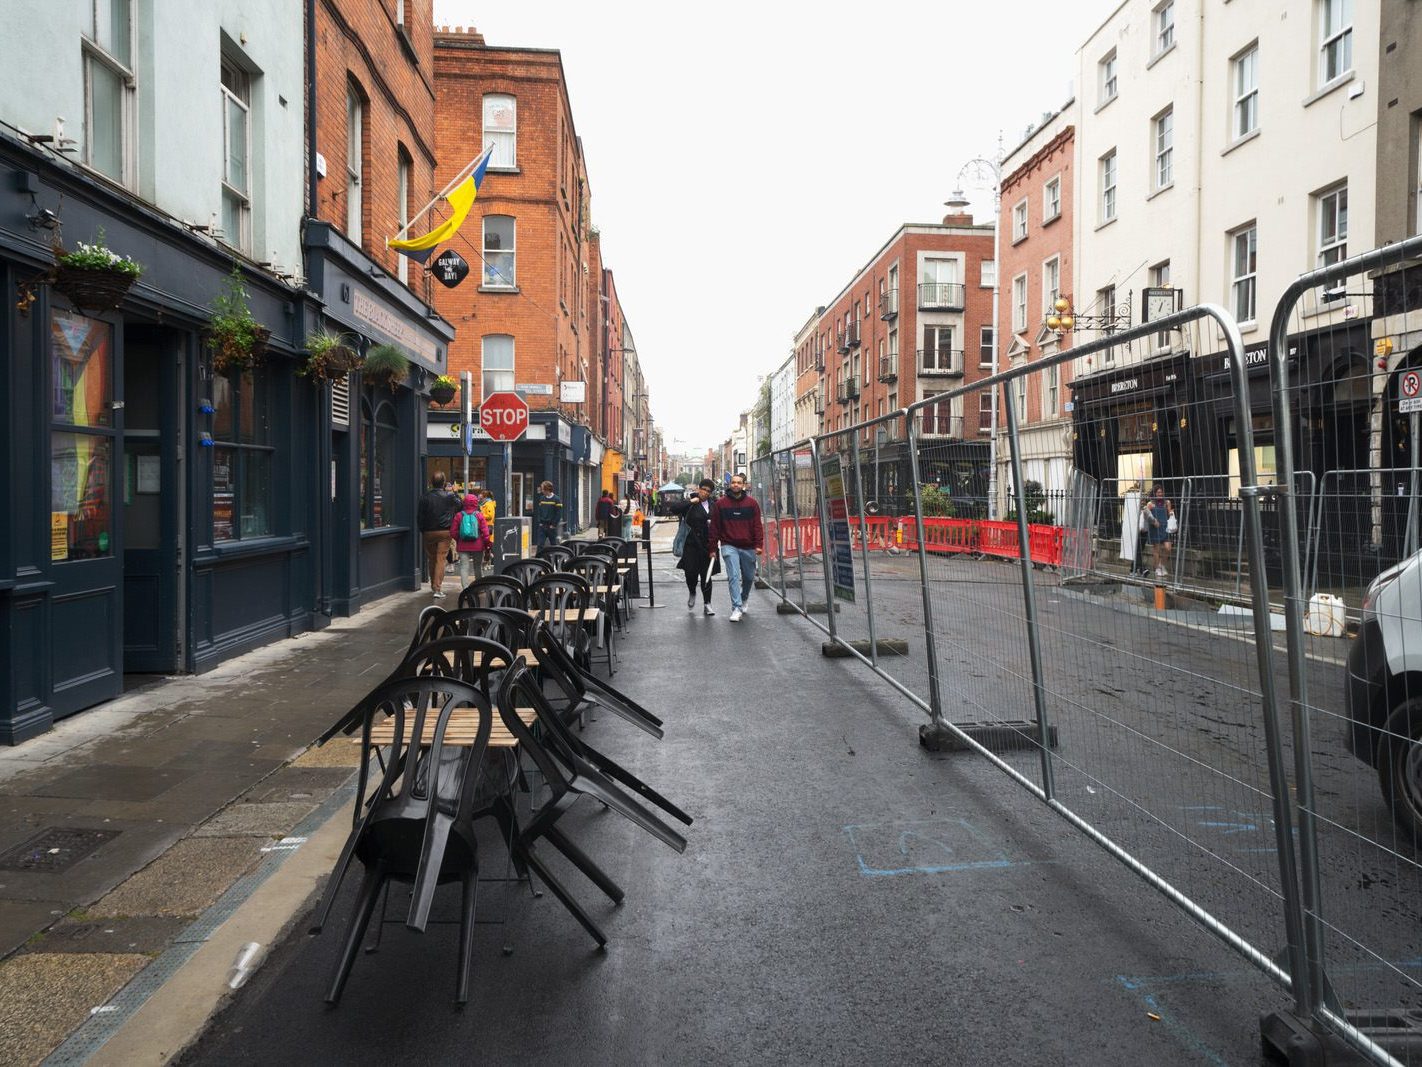 CAPEL STREET ON A DULL WET DAY [INTERIM CAPEL STREET IMPROVEMENT WORKS ARE NOW ONGOING] 009